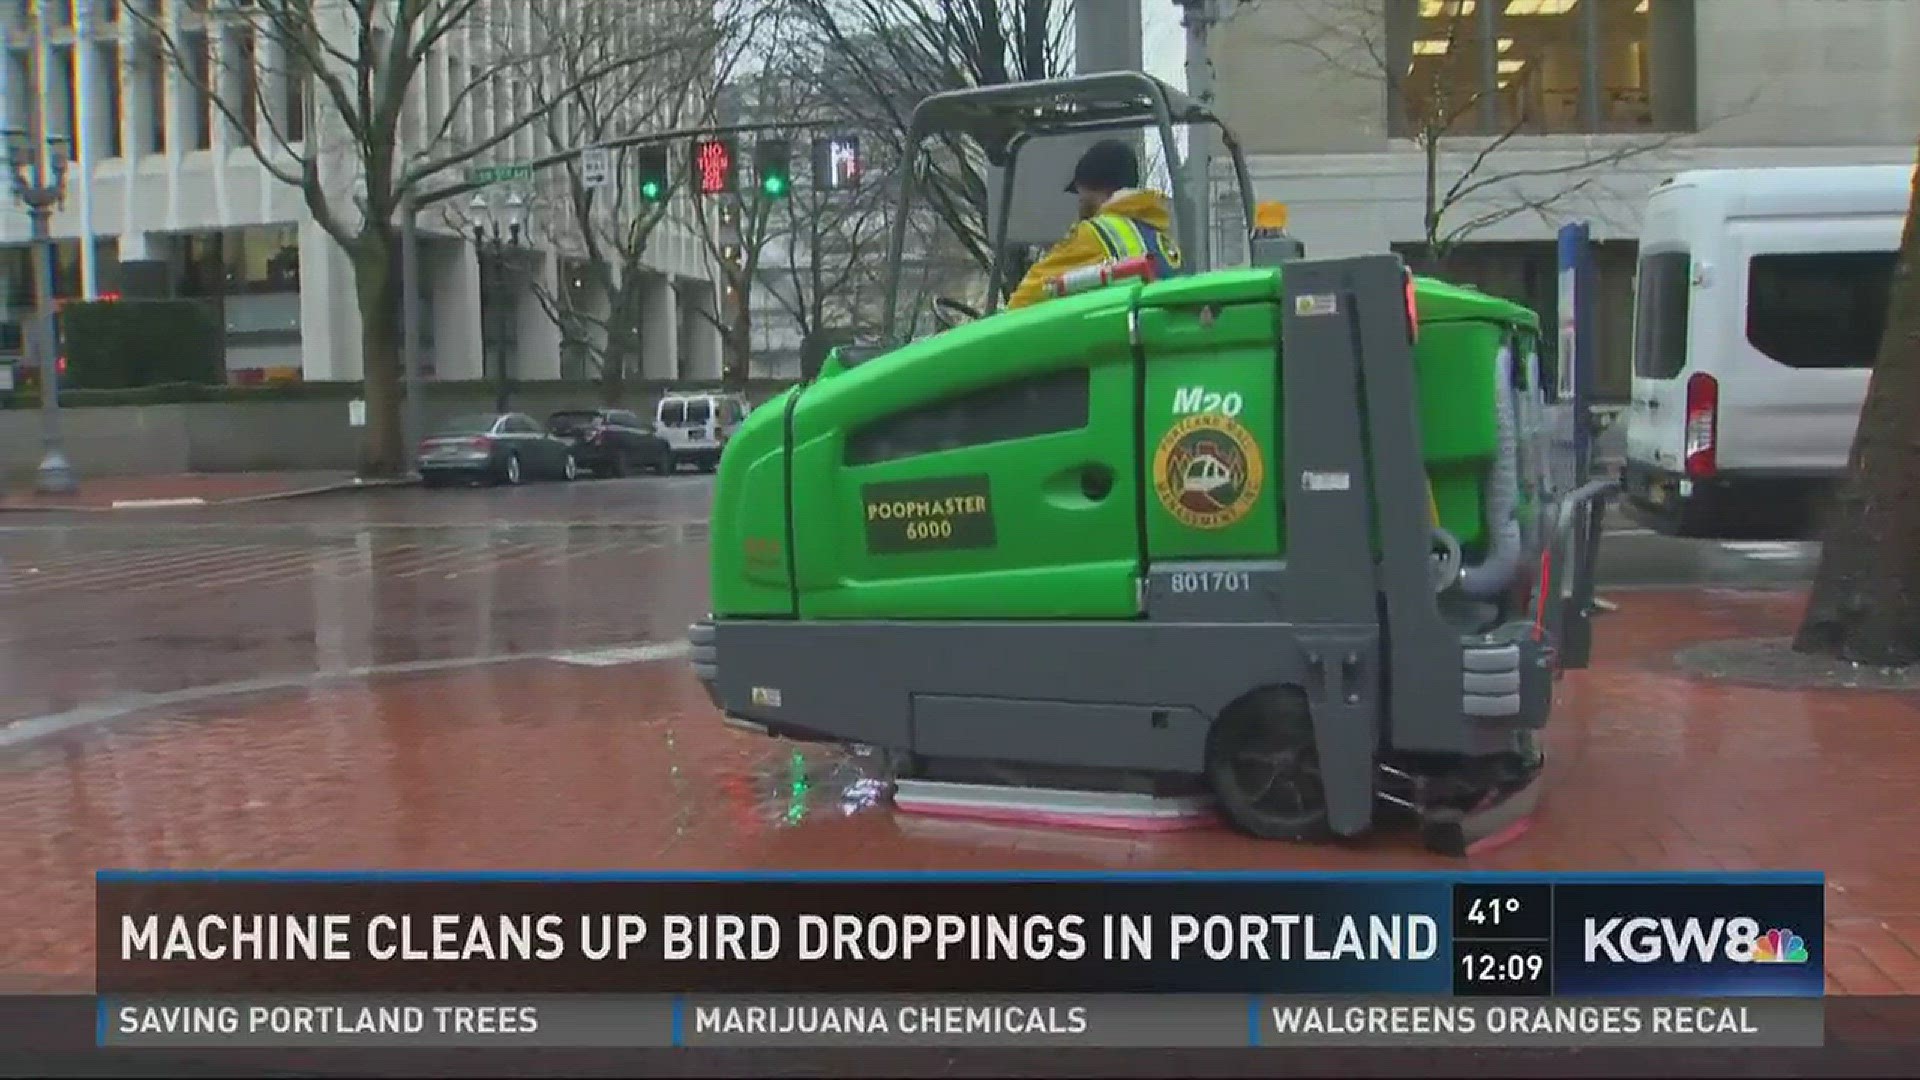 Machine cleans up bird droppings in Portland